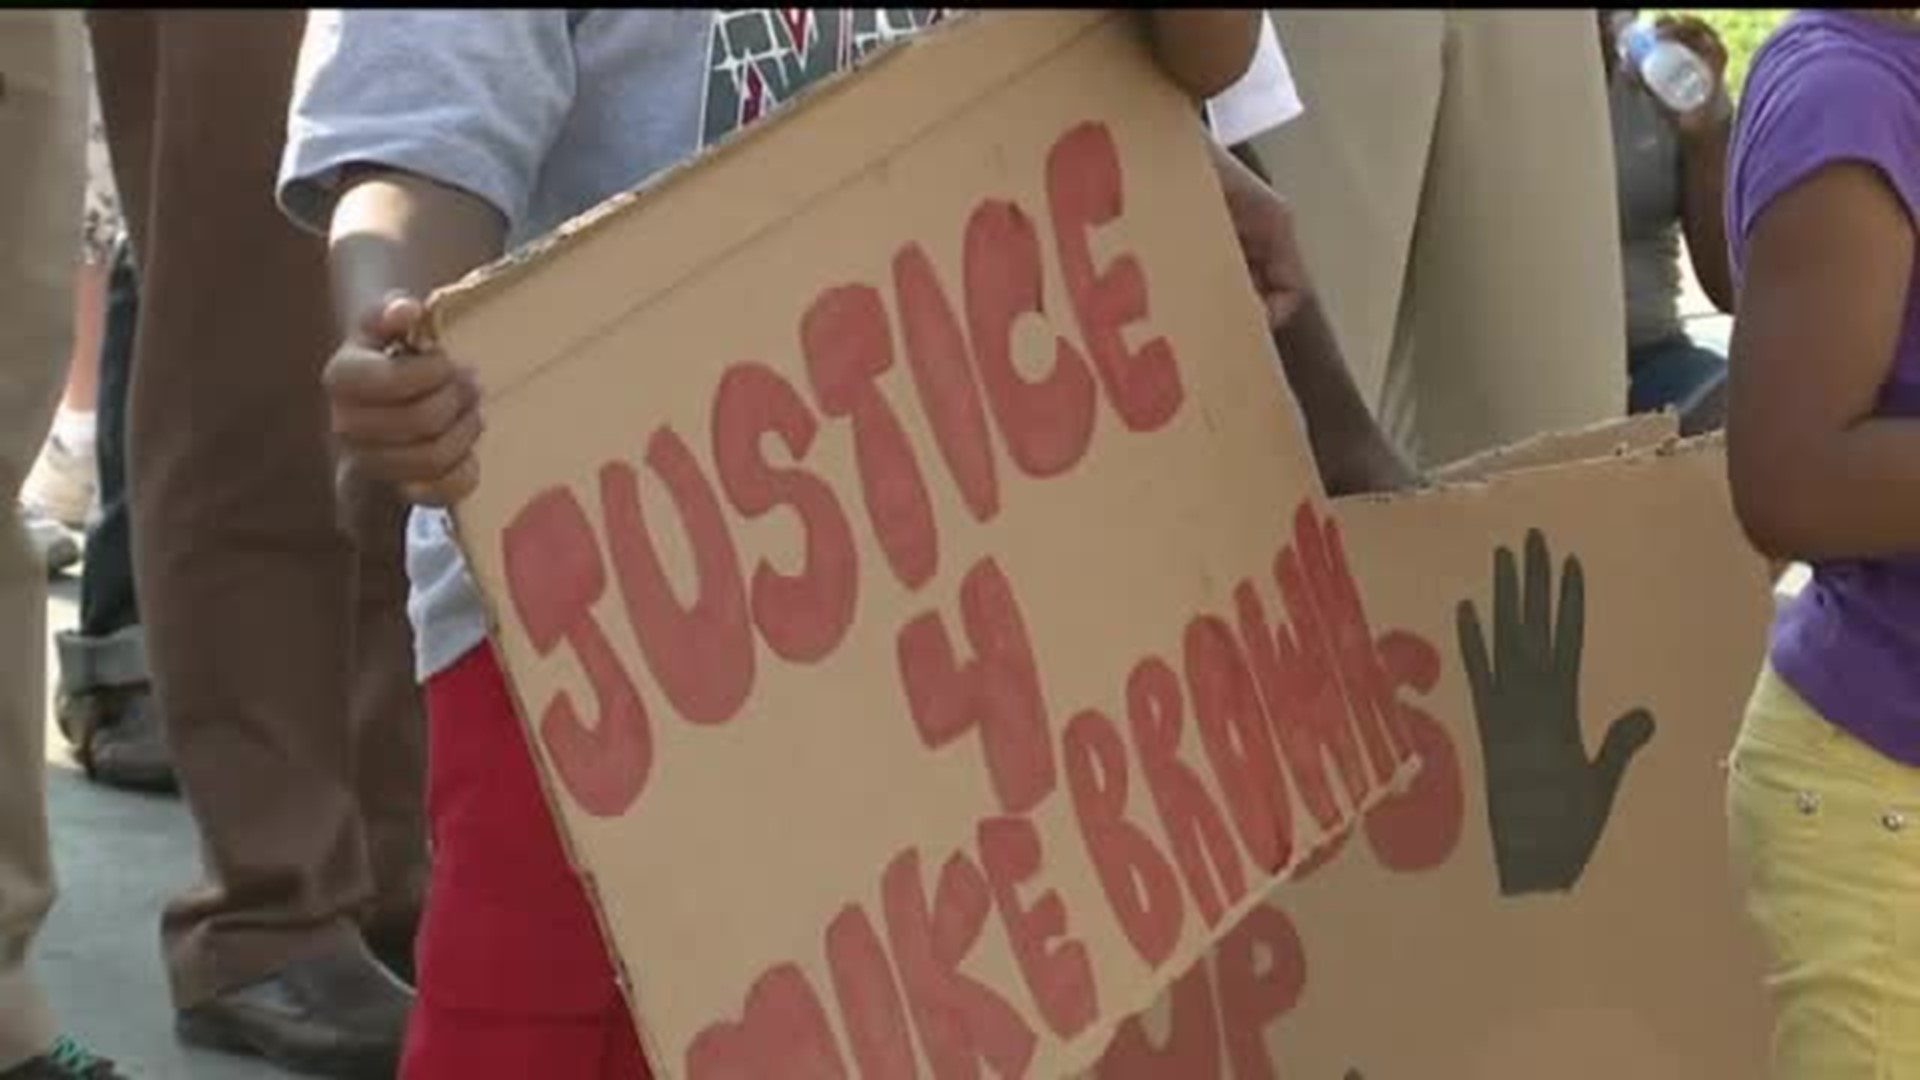 Dozens march through Rock Island for justice for Michael Brown